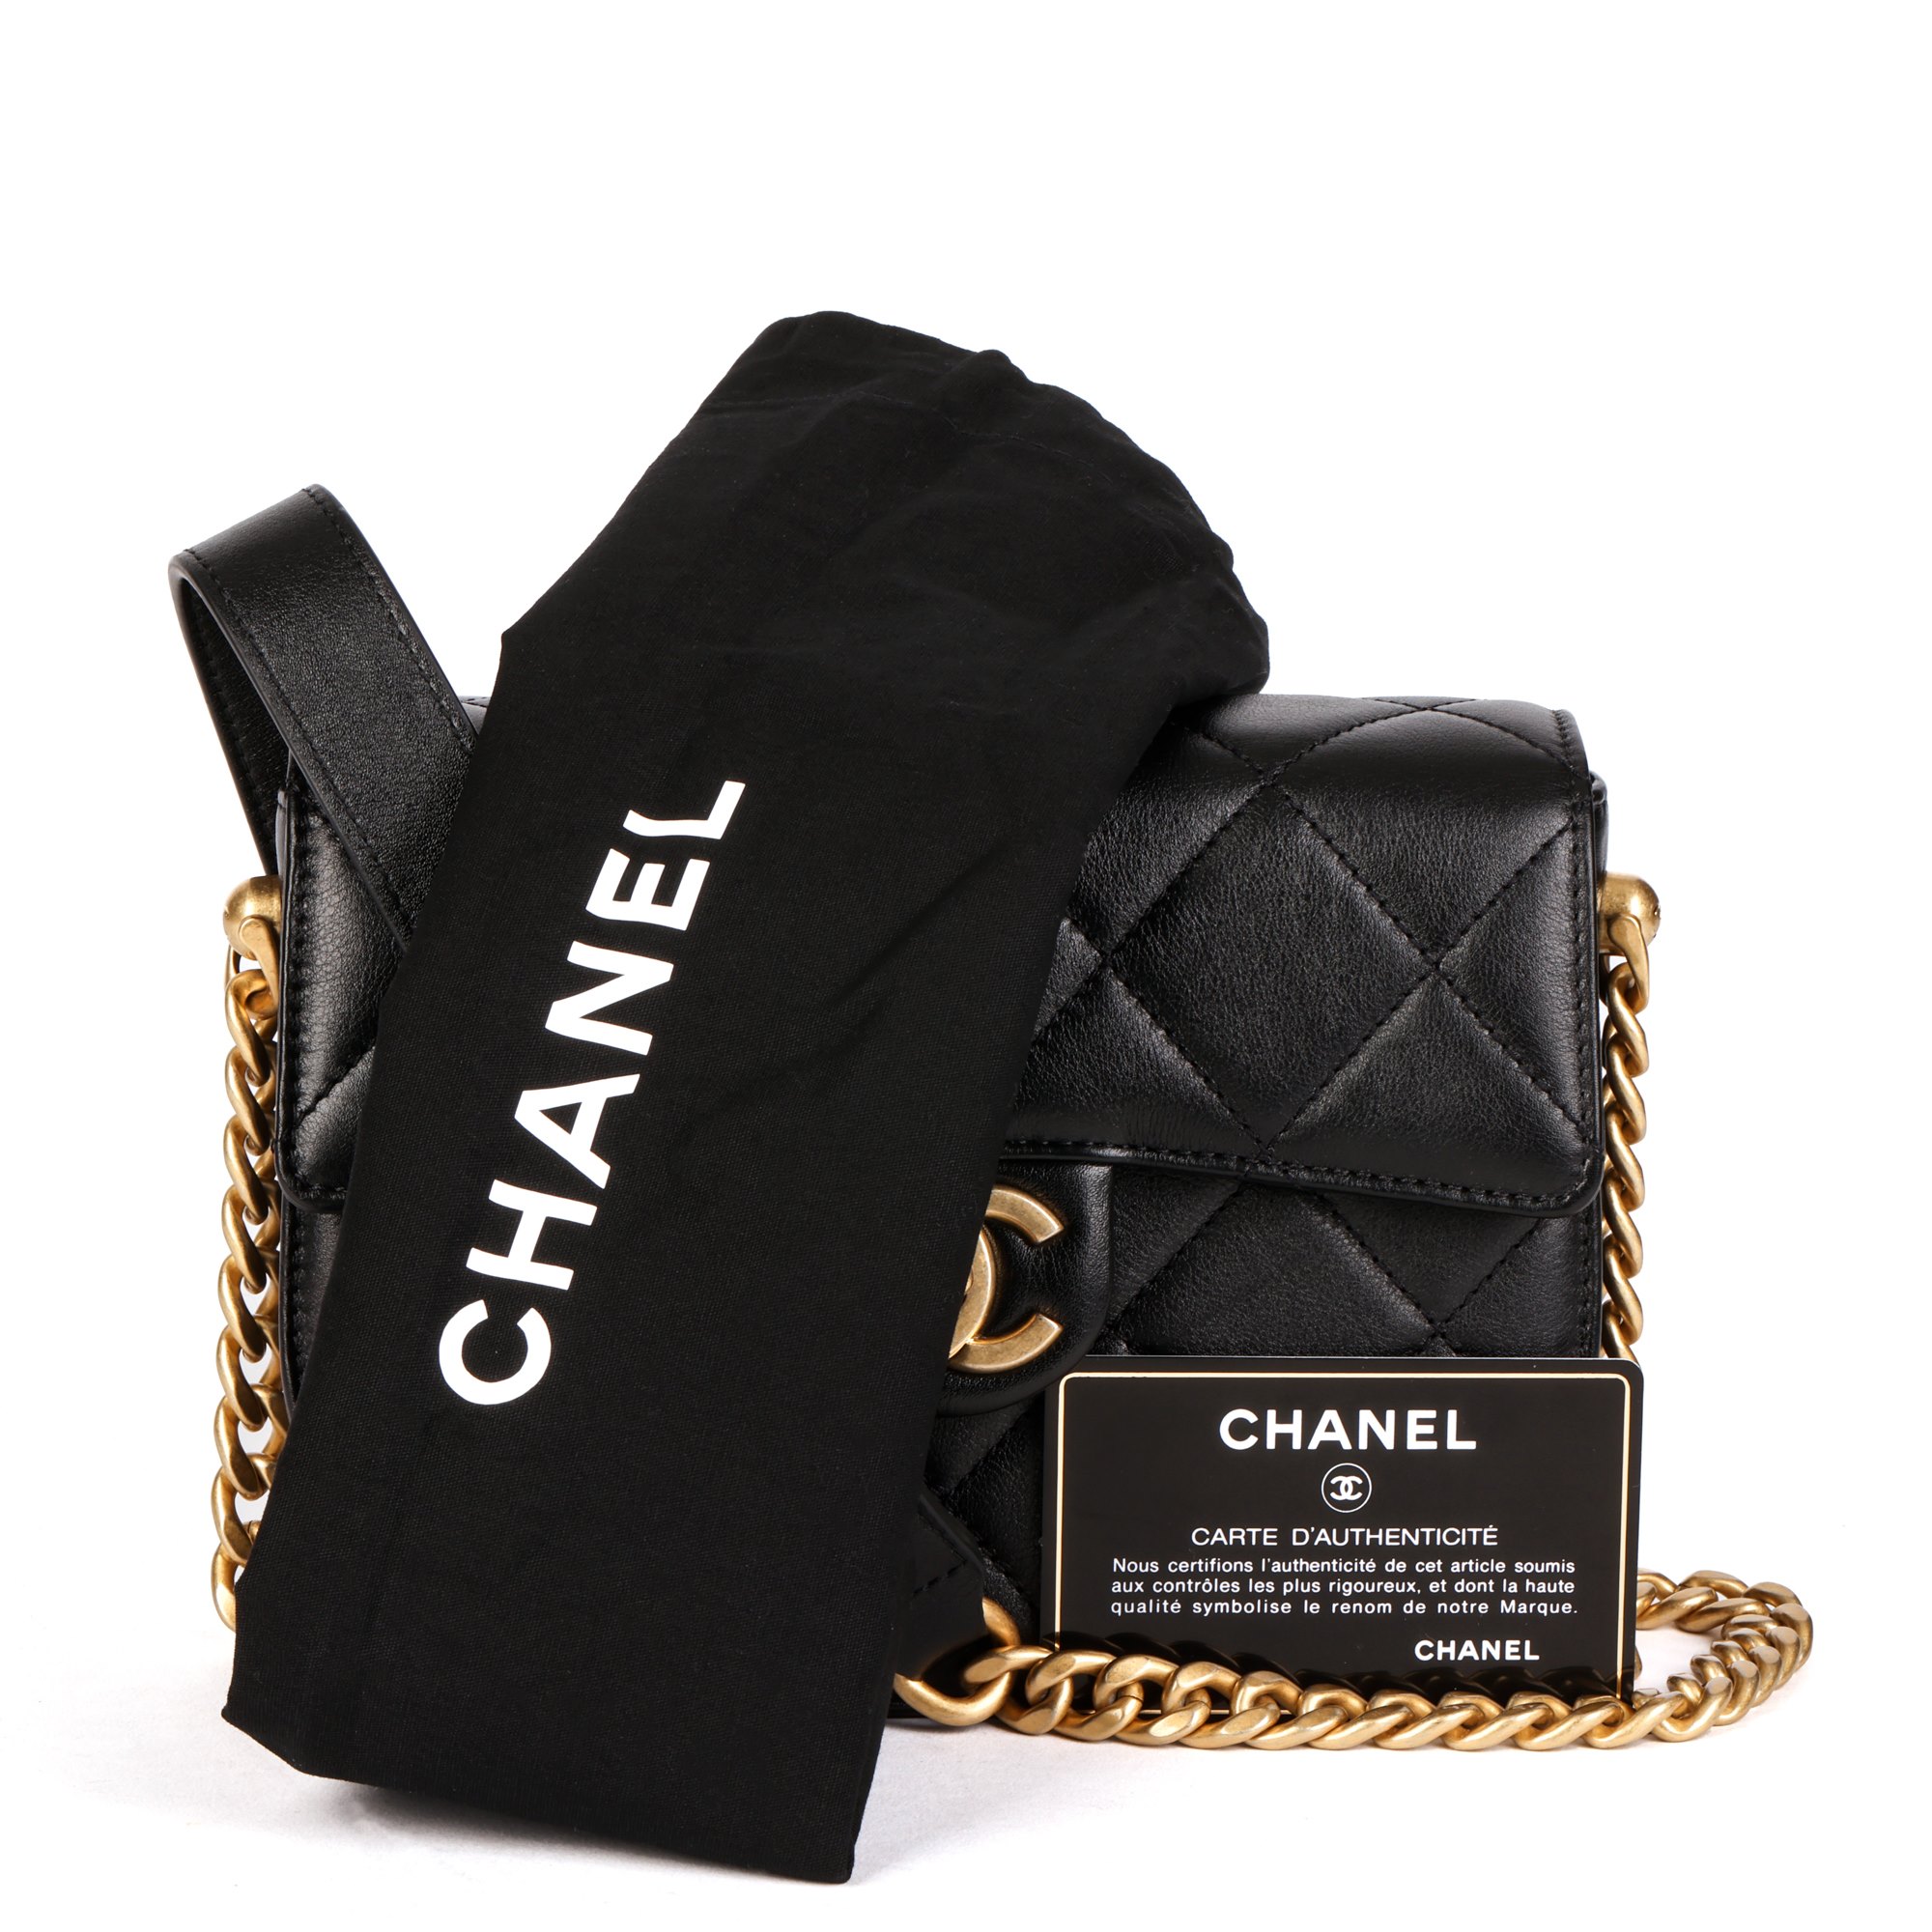 Chanel Black Quilted Lambskin Mini Messenger